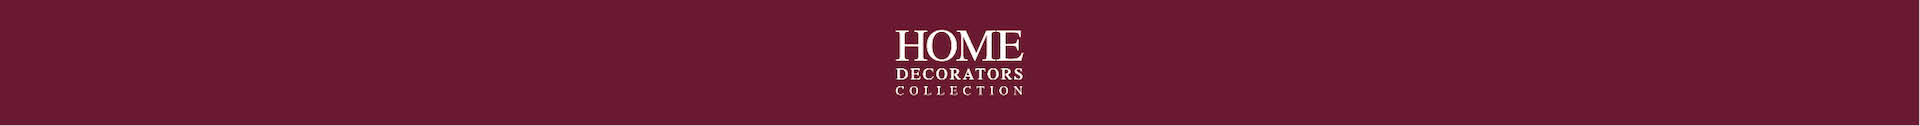  Home Decorators Collection True Cherry  7 5 in x 47 6 in 